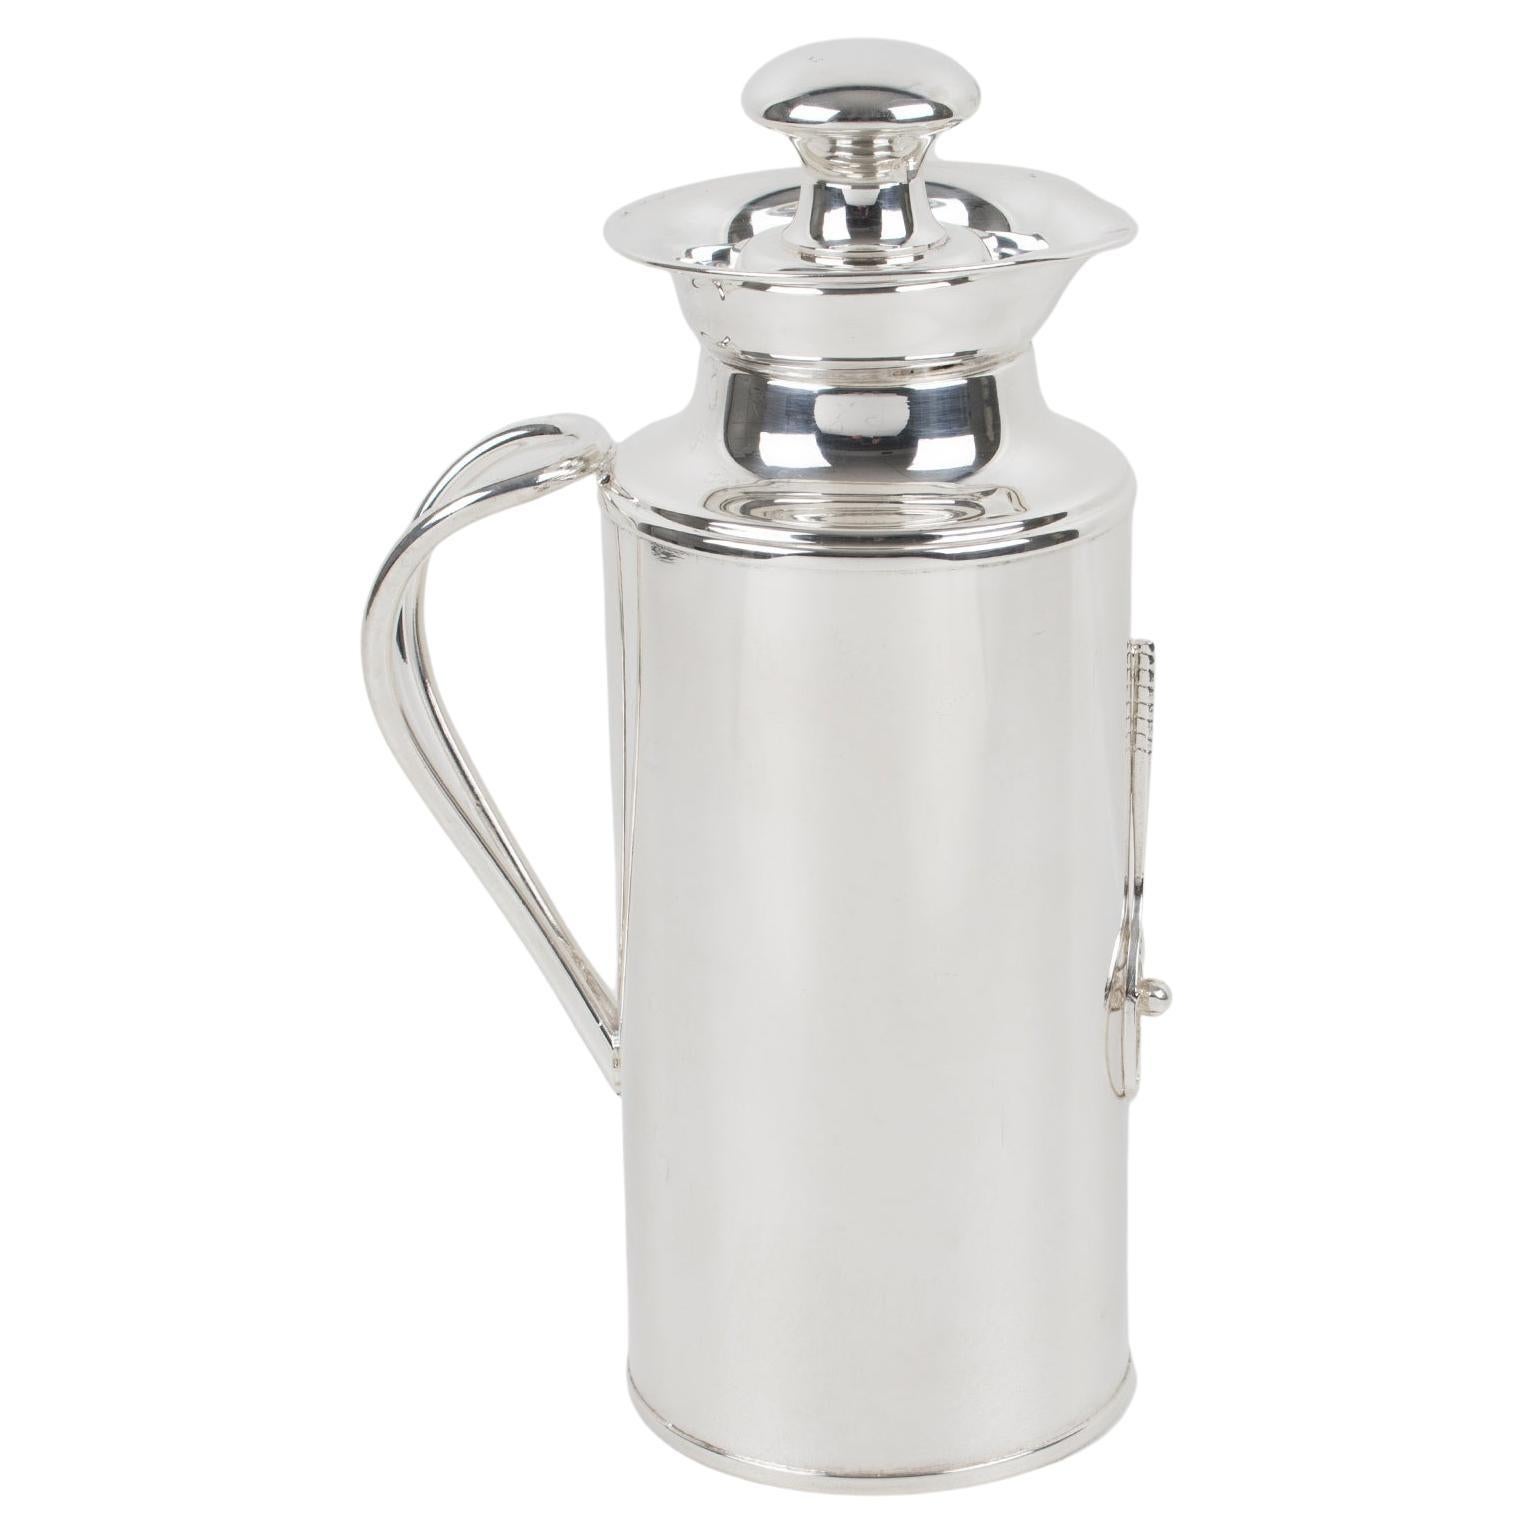 Silver Plate Thermos Insulated Decanter with Tennis Motif, Italy 1980s